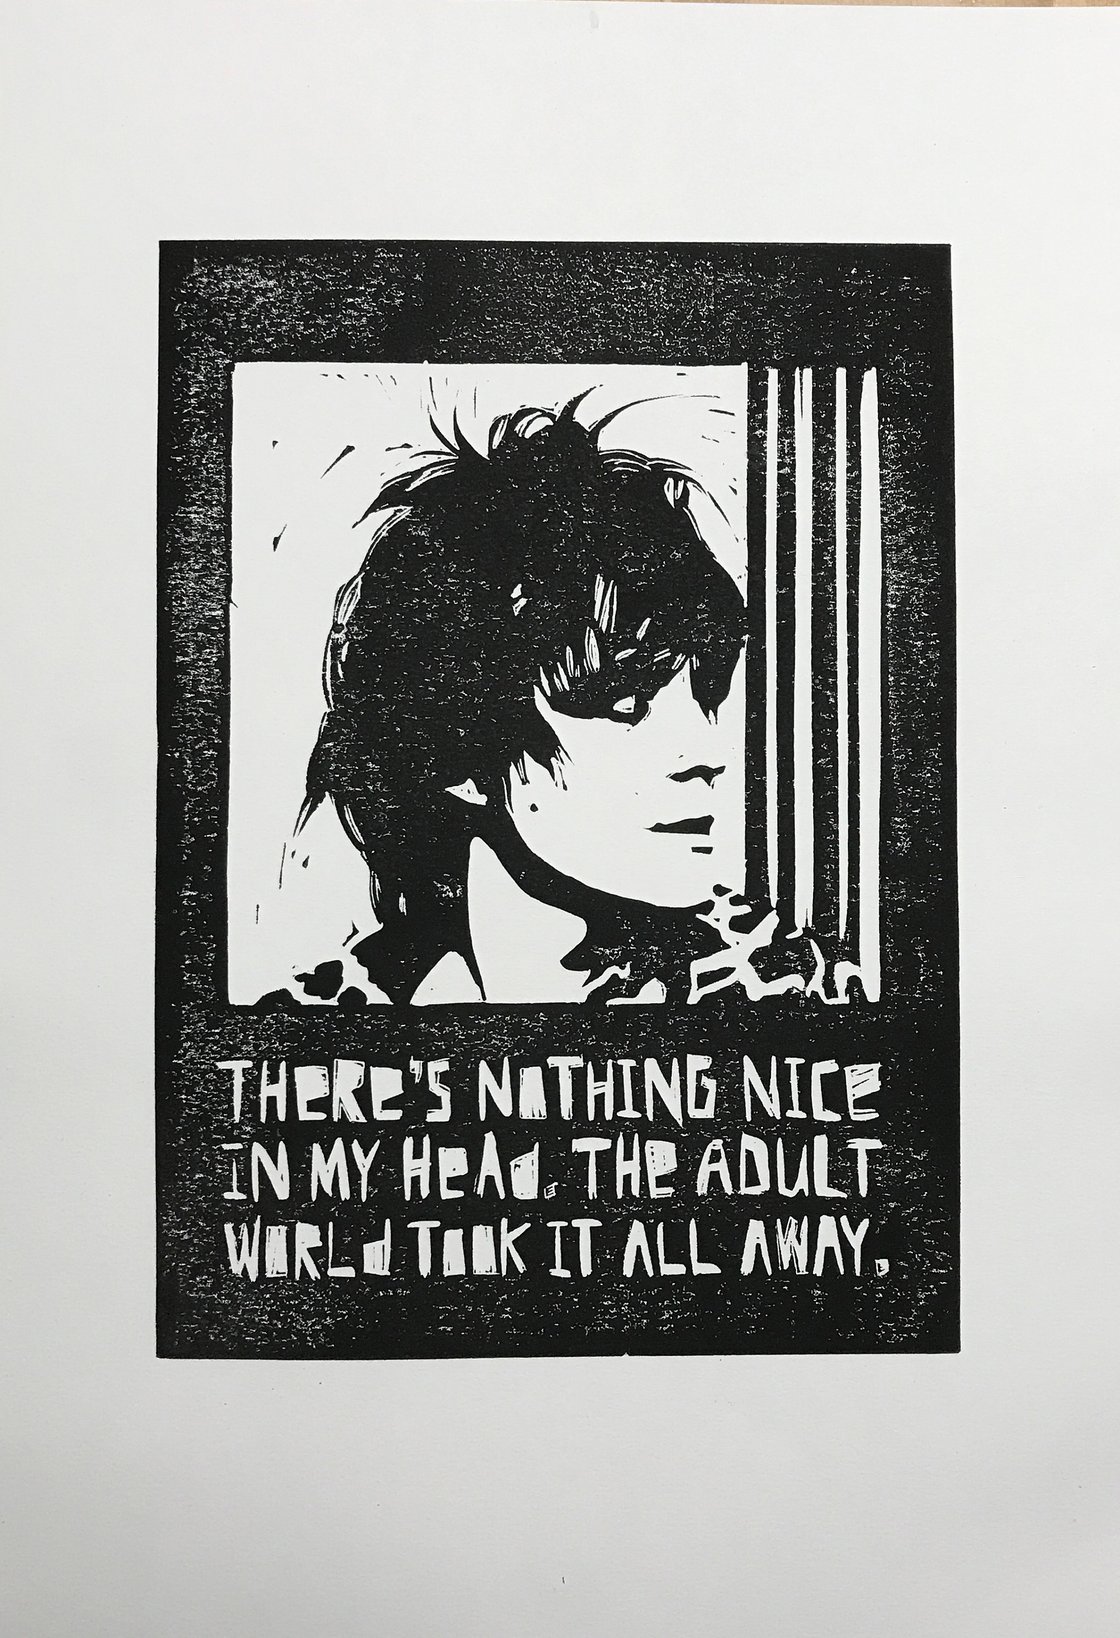 Image of Richey. Manic Street Preachers. Hand Made. Original A4 linocut print. Limited and Signed. Art.